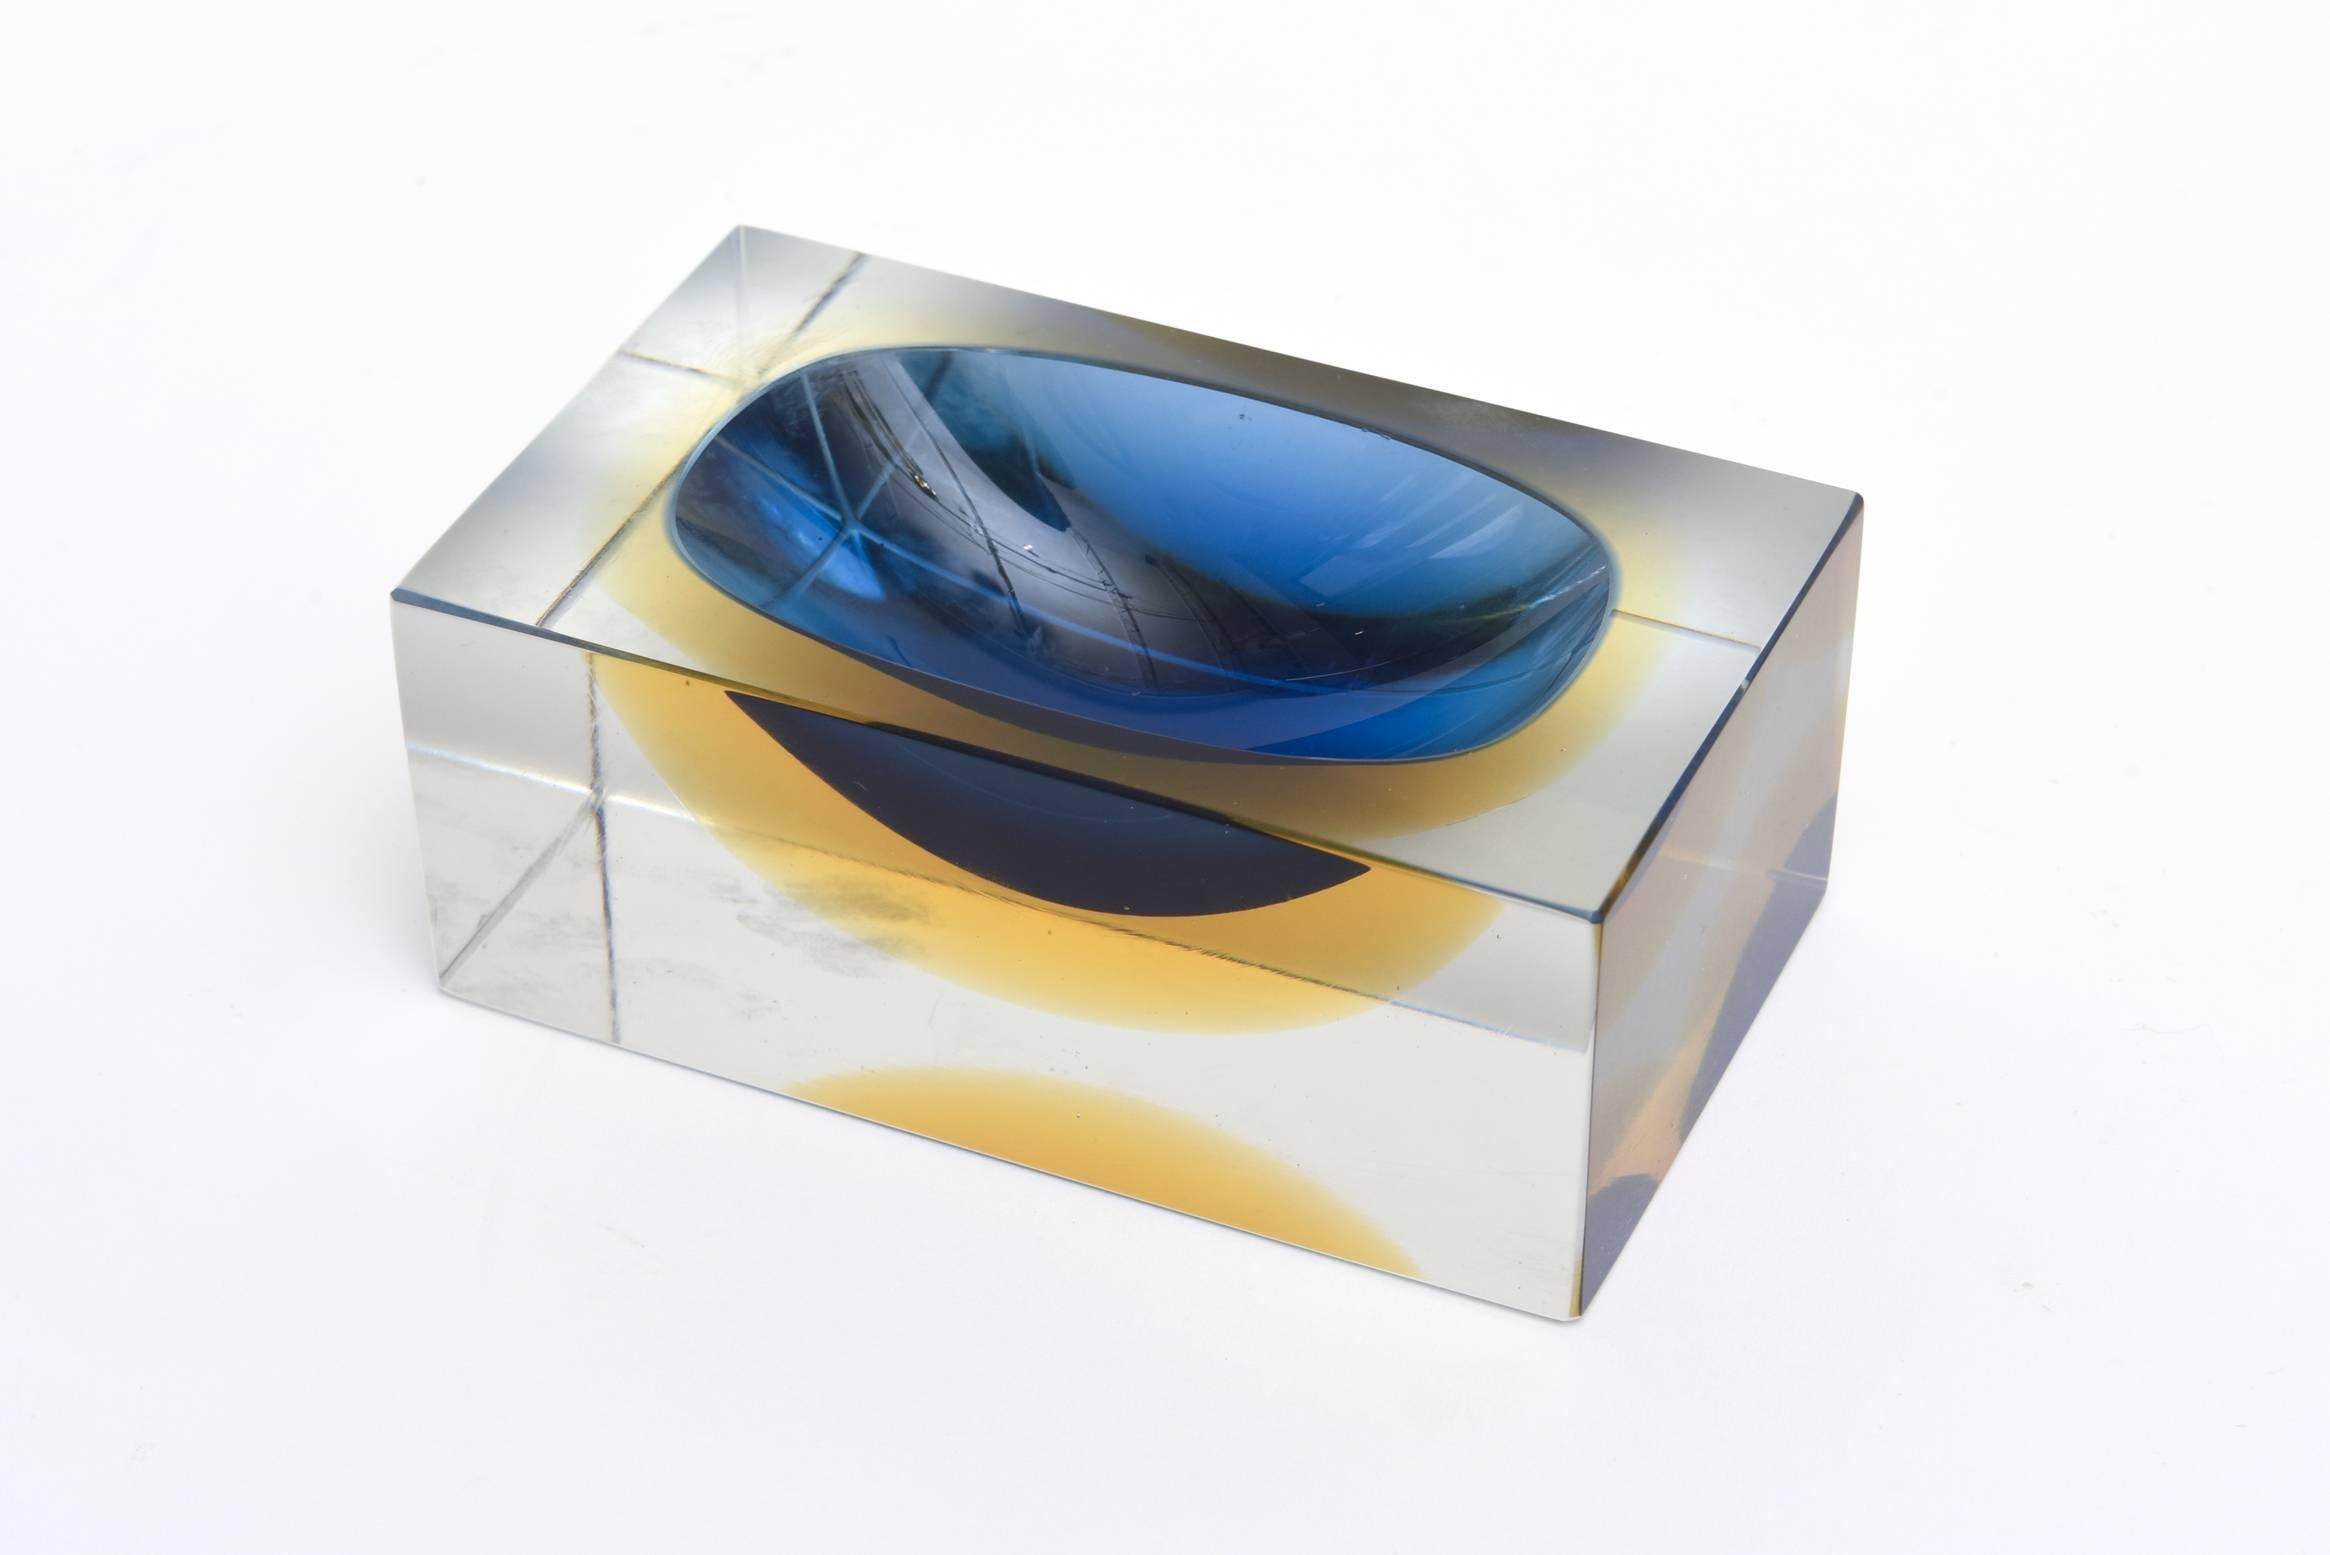 This small but wonderful Italian Murano vintage Sommerso Flavio Poli glass bowl, dish or vide poche in vivid colors of brilliant blue and yellow, and clear Sommerso form will be a great addition to any table or desk. Hard to come by in the rectangle